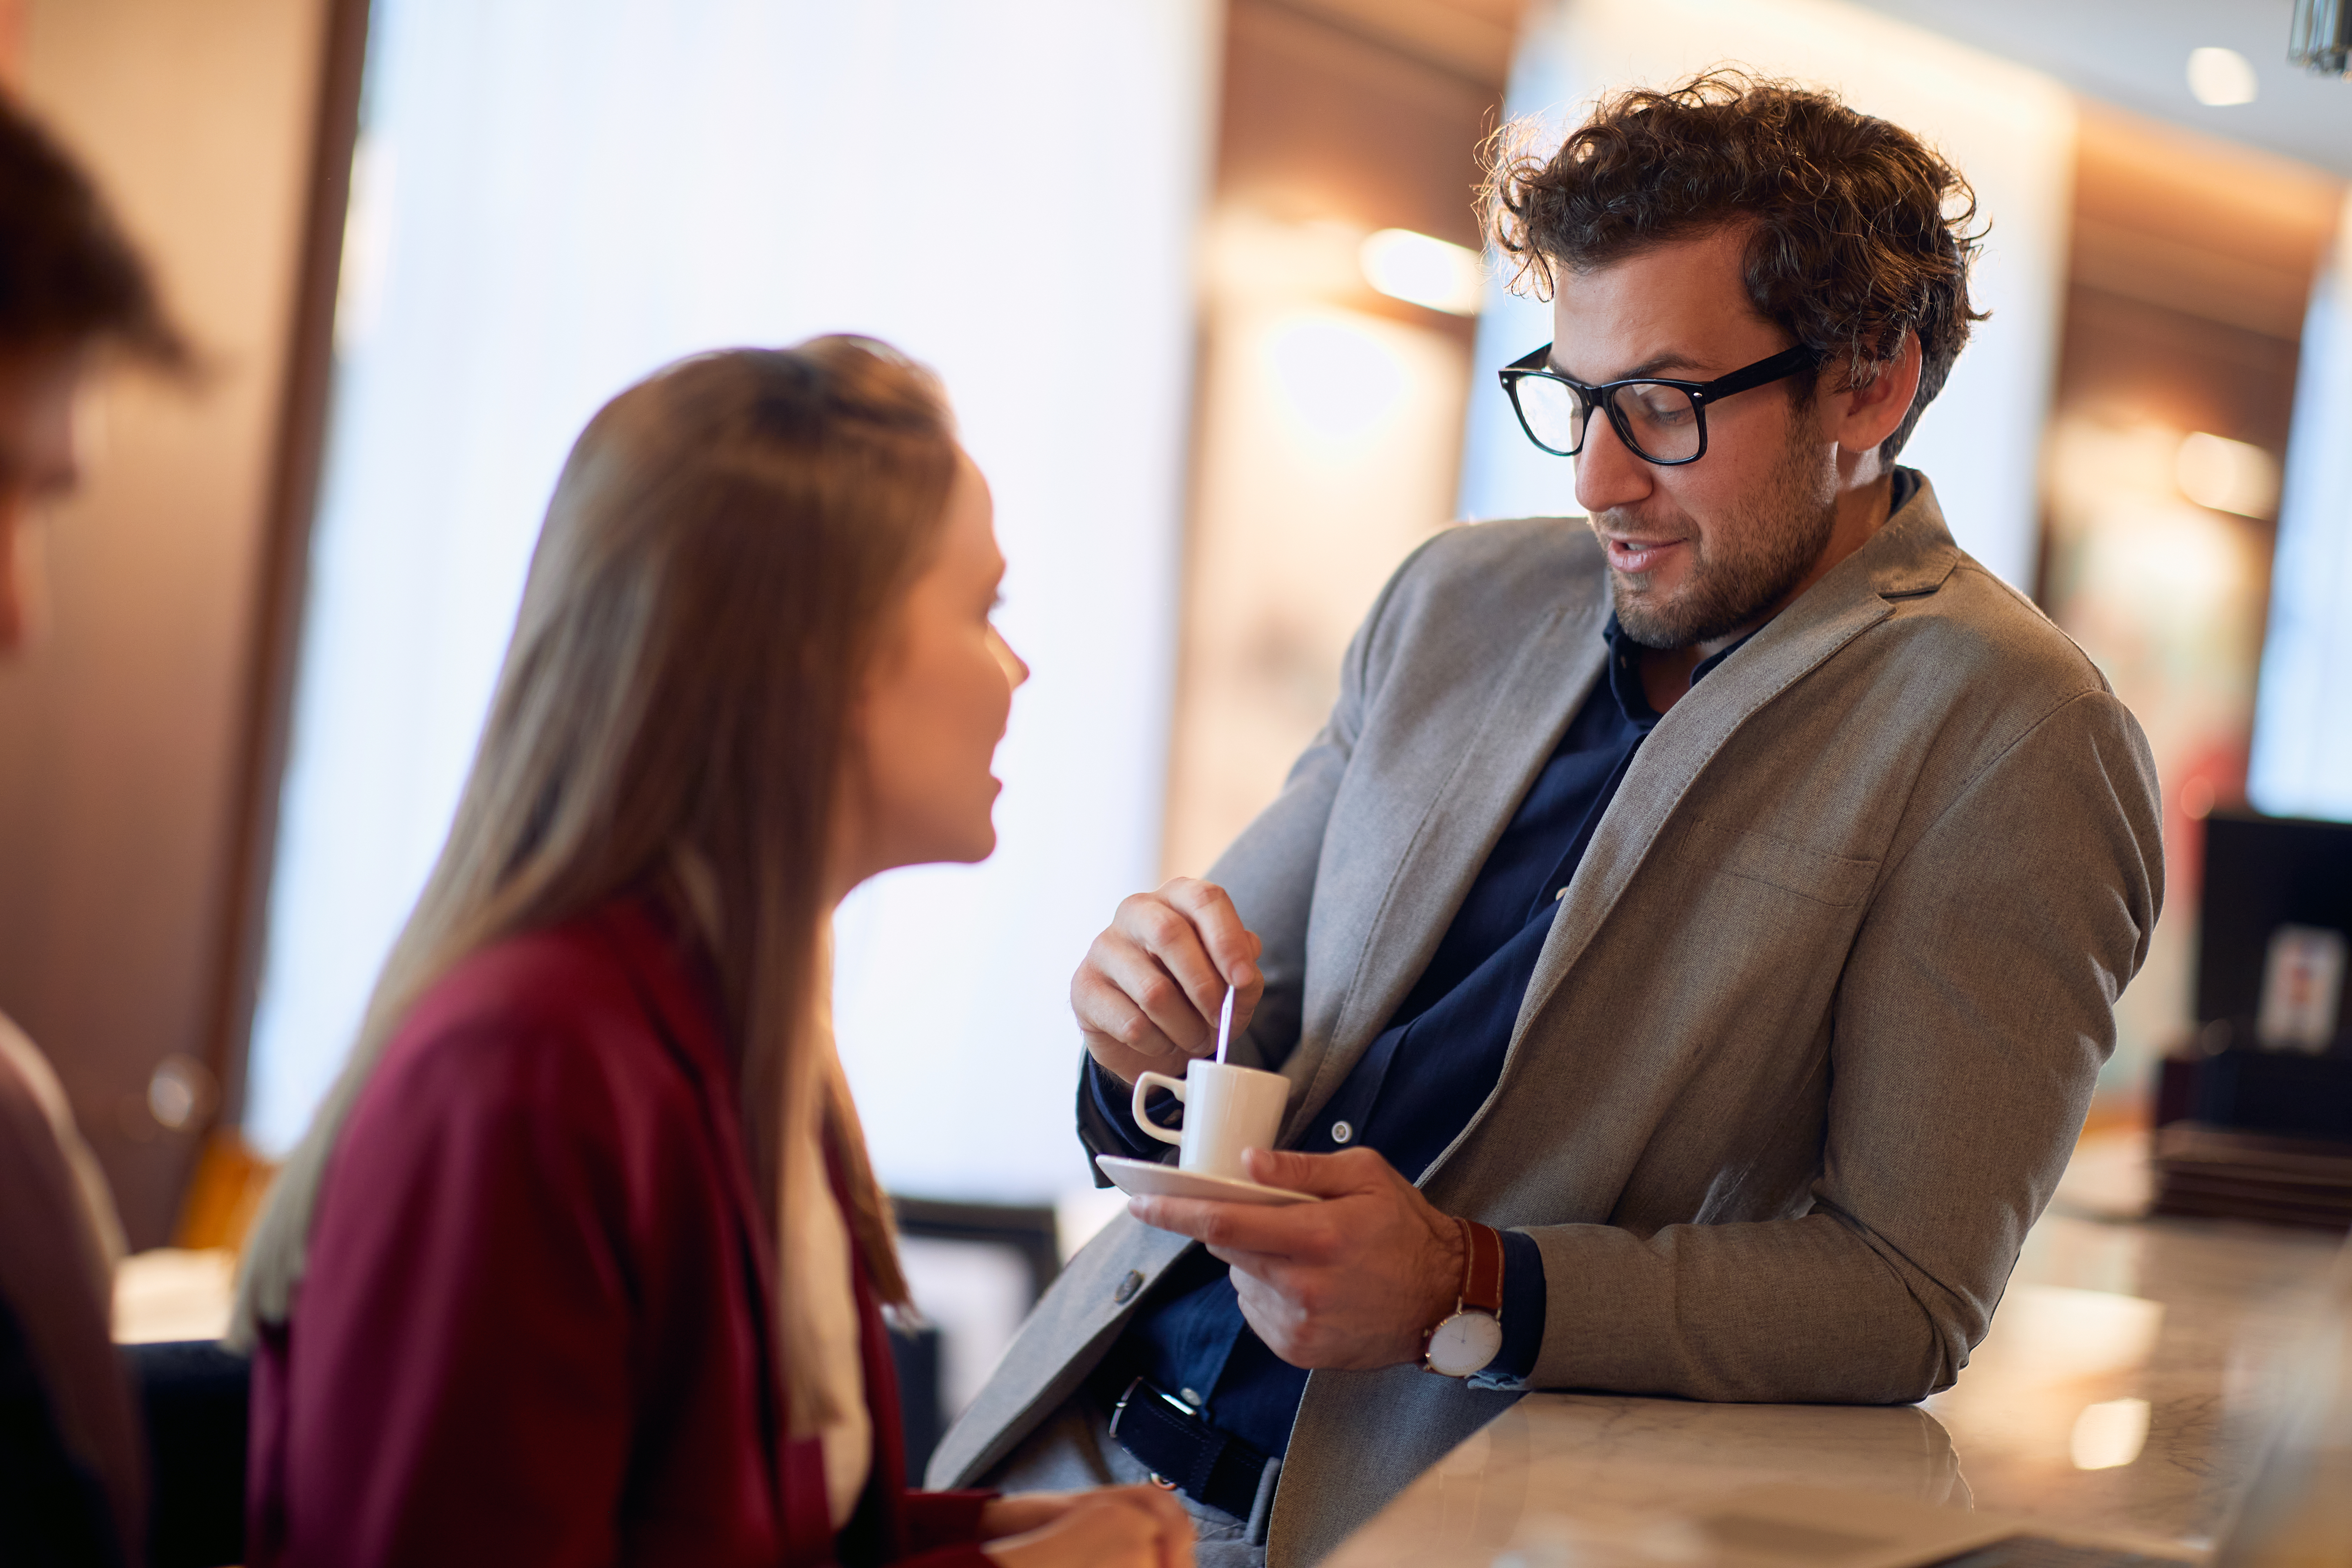 Businessman speaks with young woman. | Source: Shutterstock